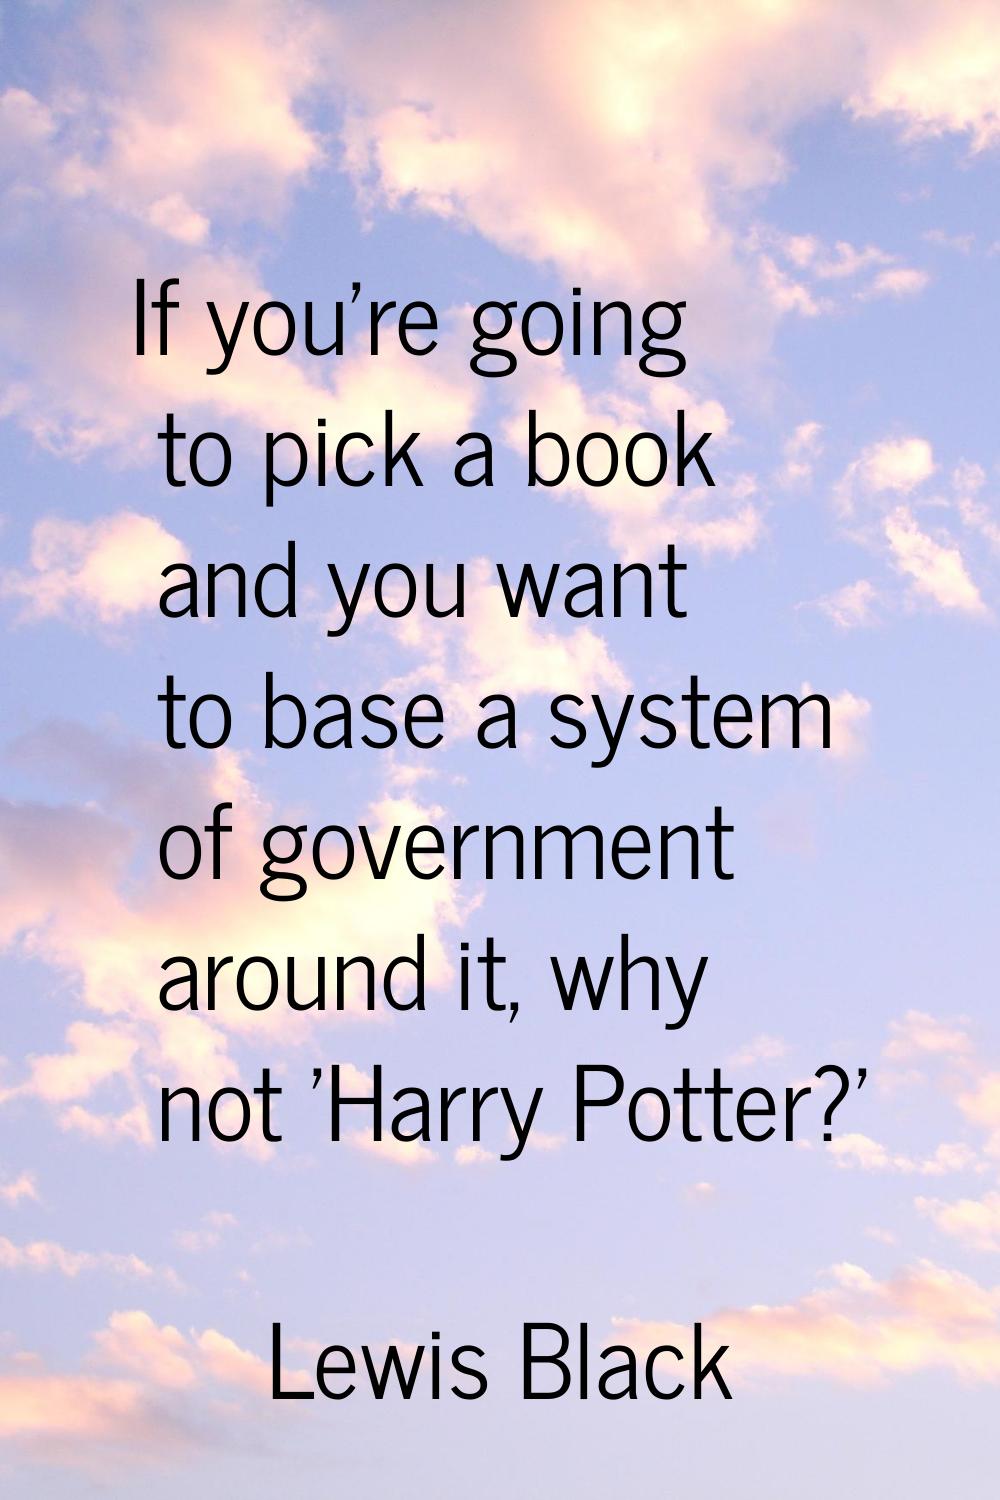 If you're going to pick a book and you want to base a system of government around it, why not 'Harr